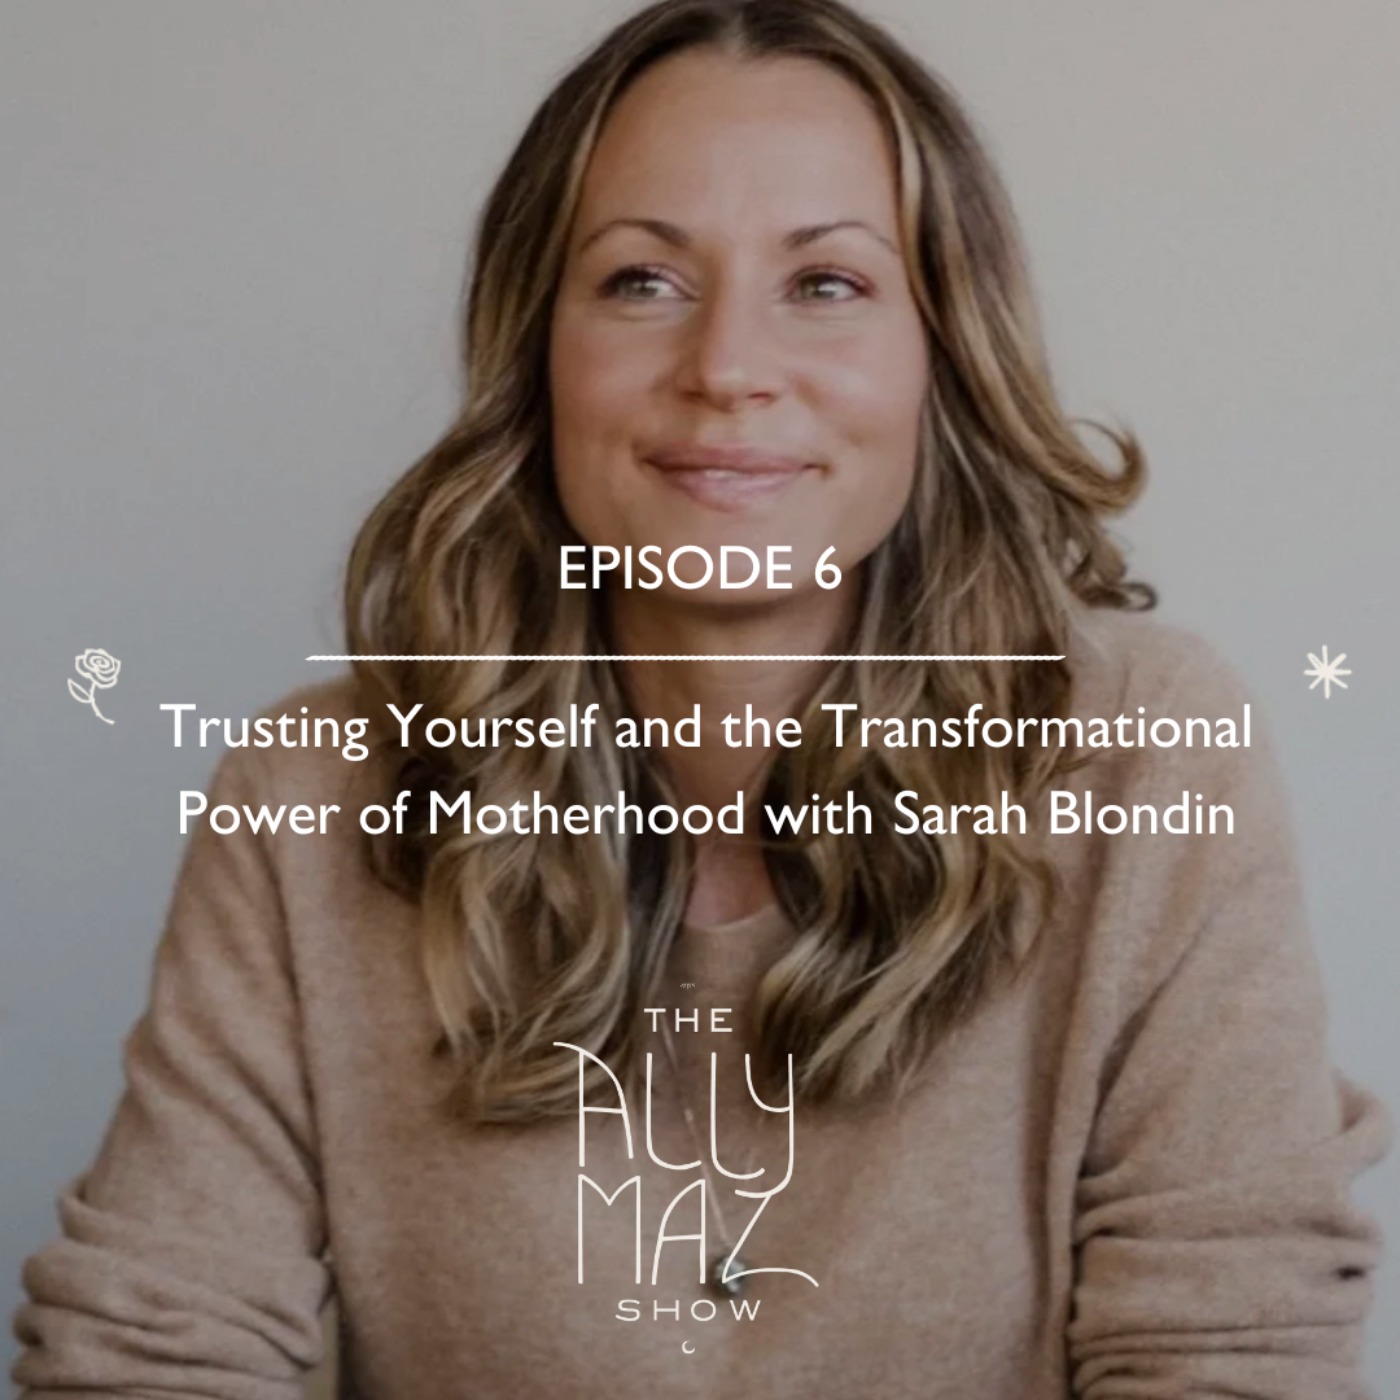 Trusting Yourself and the Transformational Power of Motherhood with Sarah Blondin